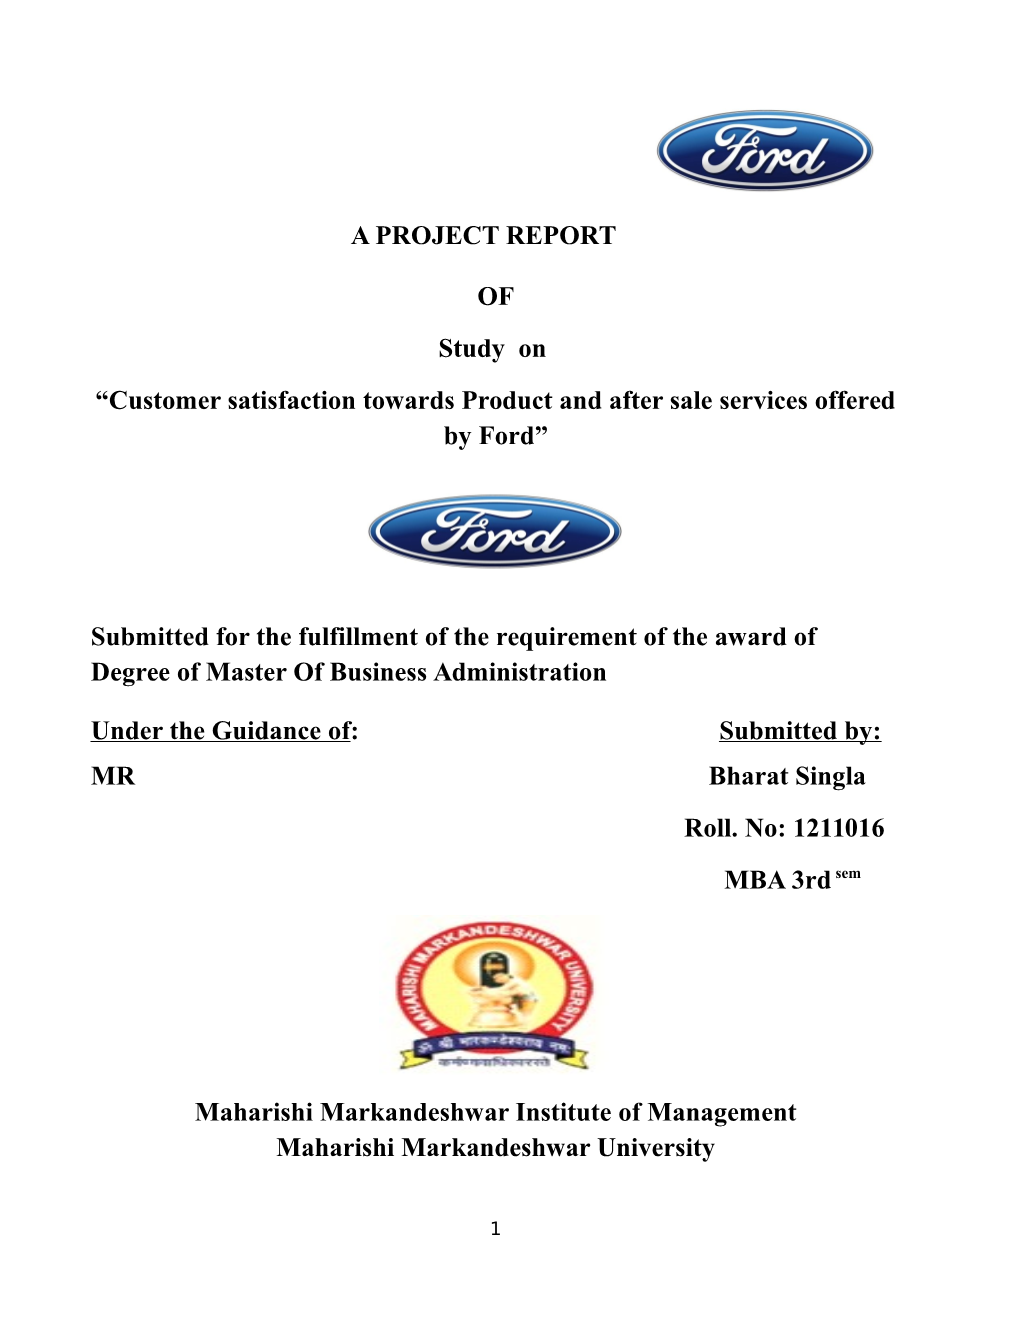 A PROJECT REPORT of Study on “Customer Satisfaction Towards